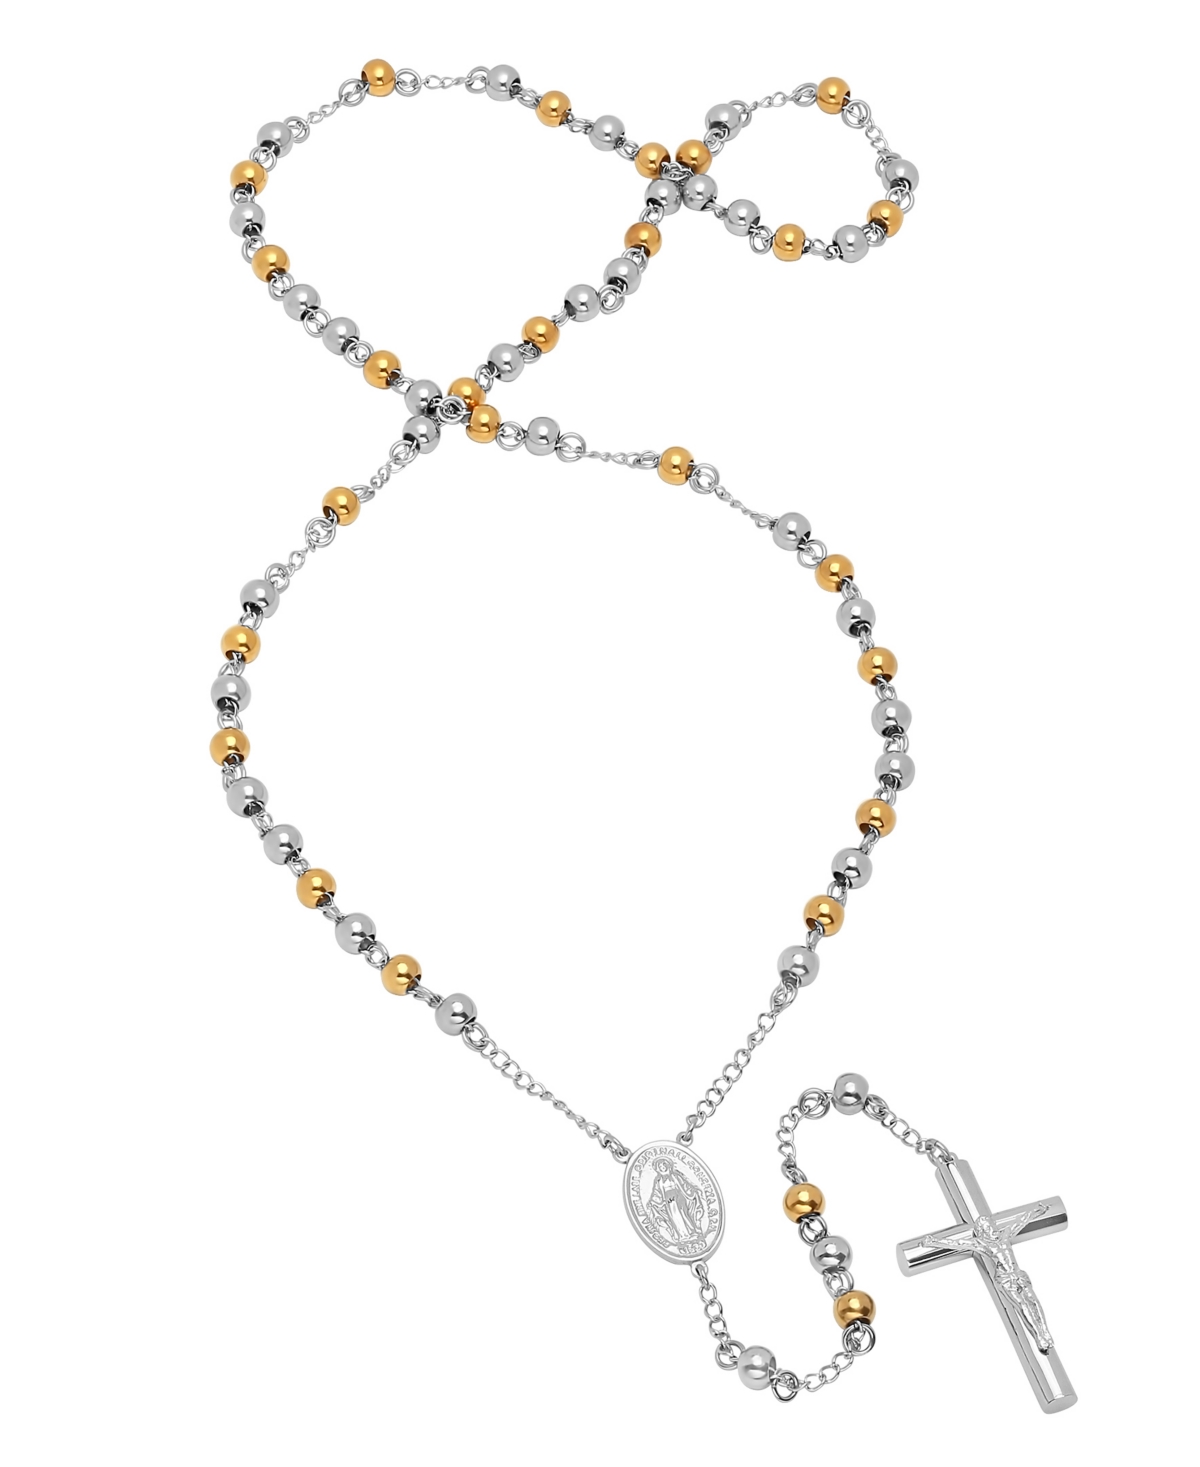 C & c Jewelry Macy's Madonna And Crucifix Rosary Necklace in Two-Tone Stainless Steel